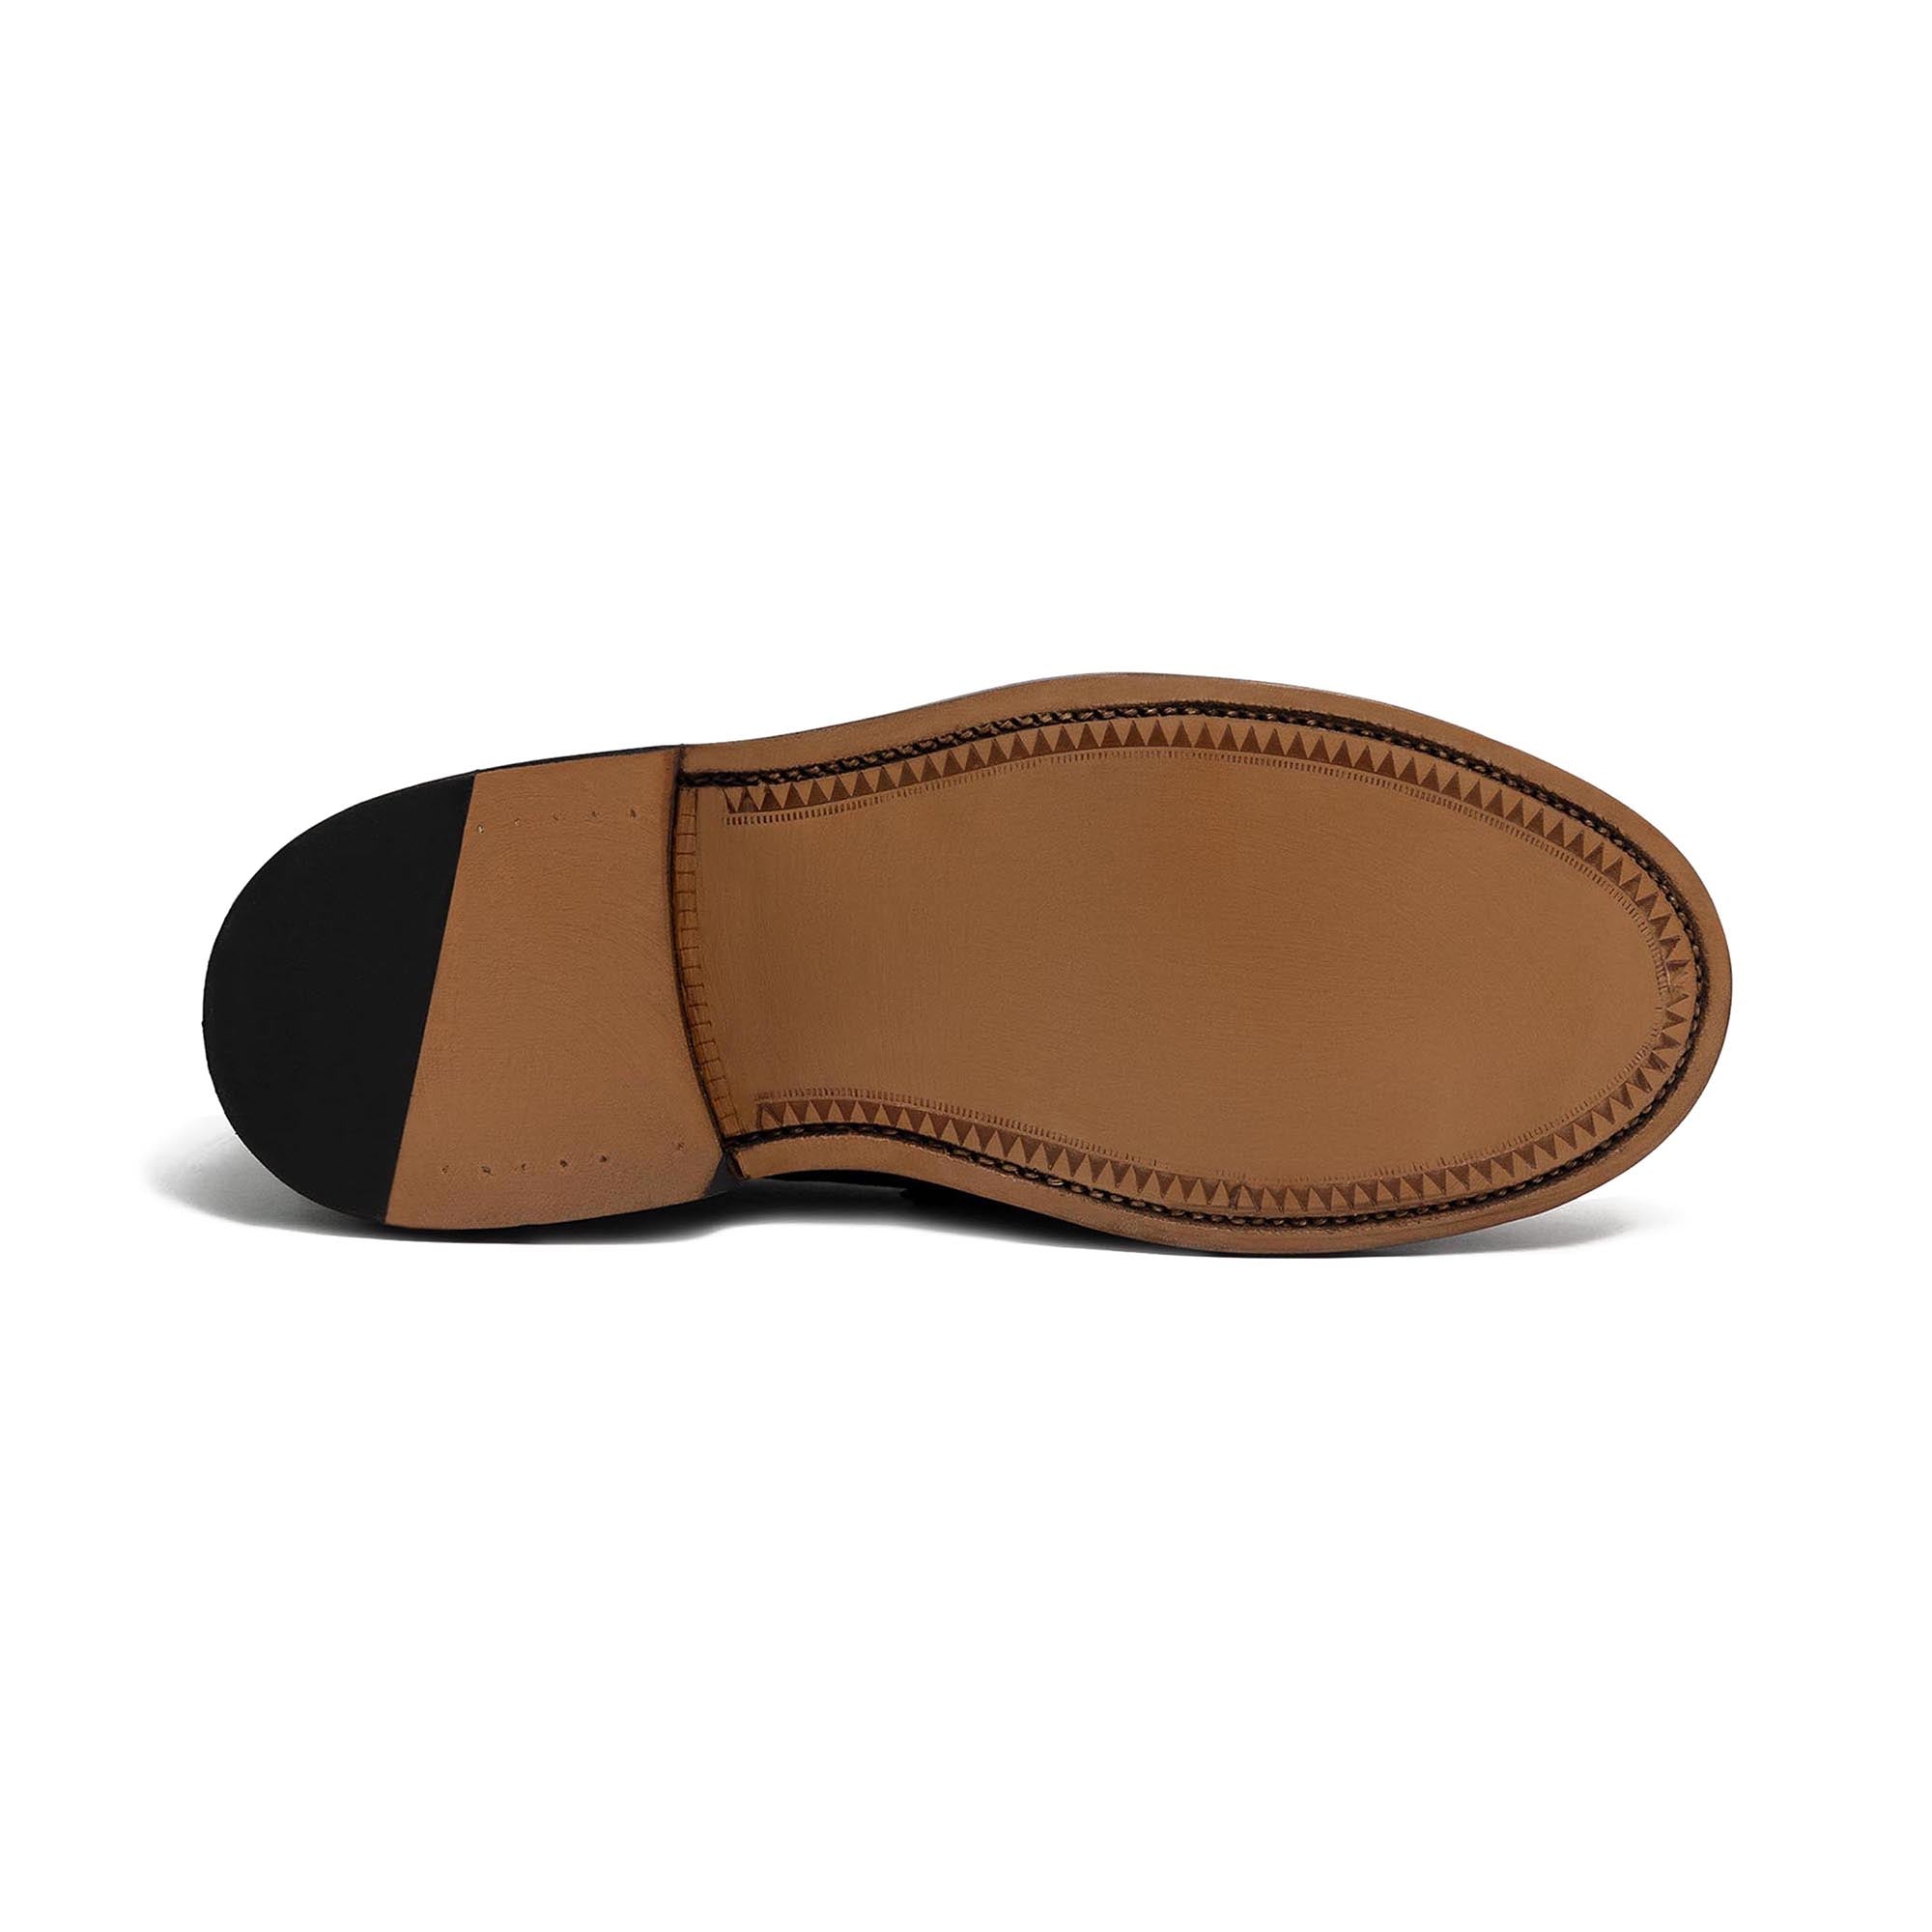 The Ellis Penny Loafer, Bamboo/White